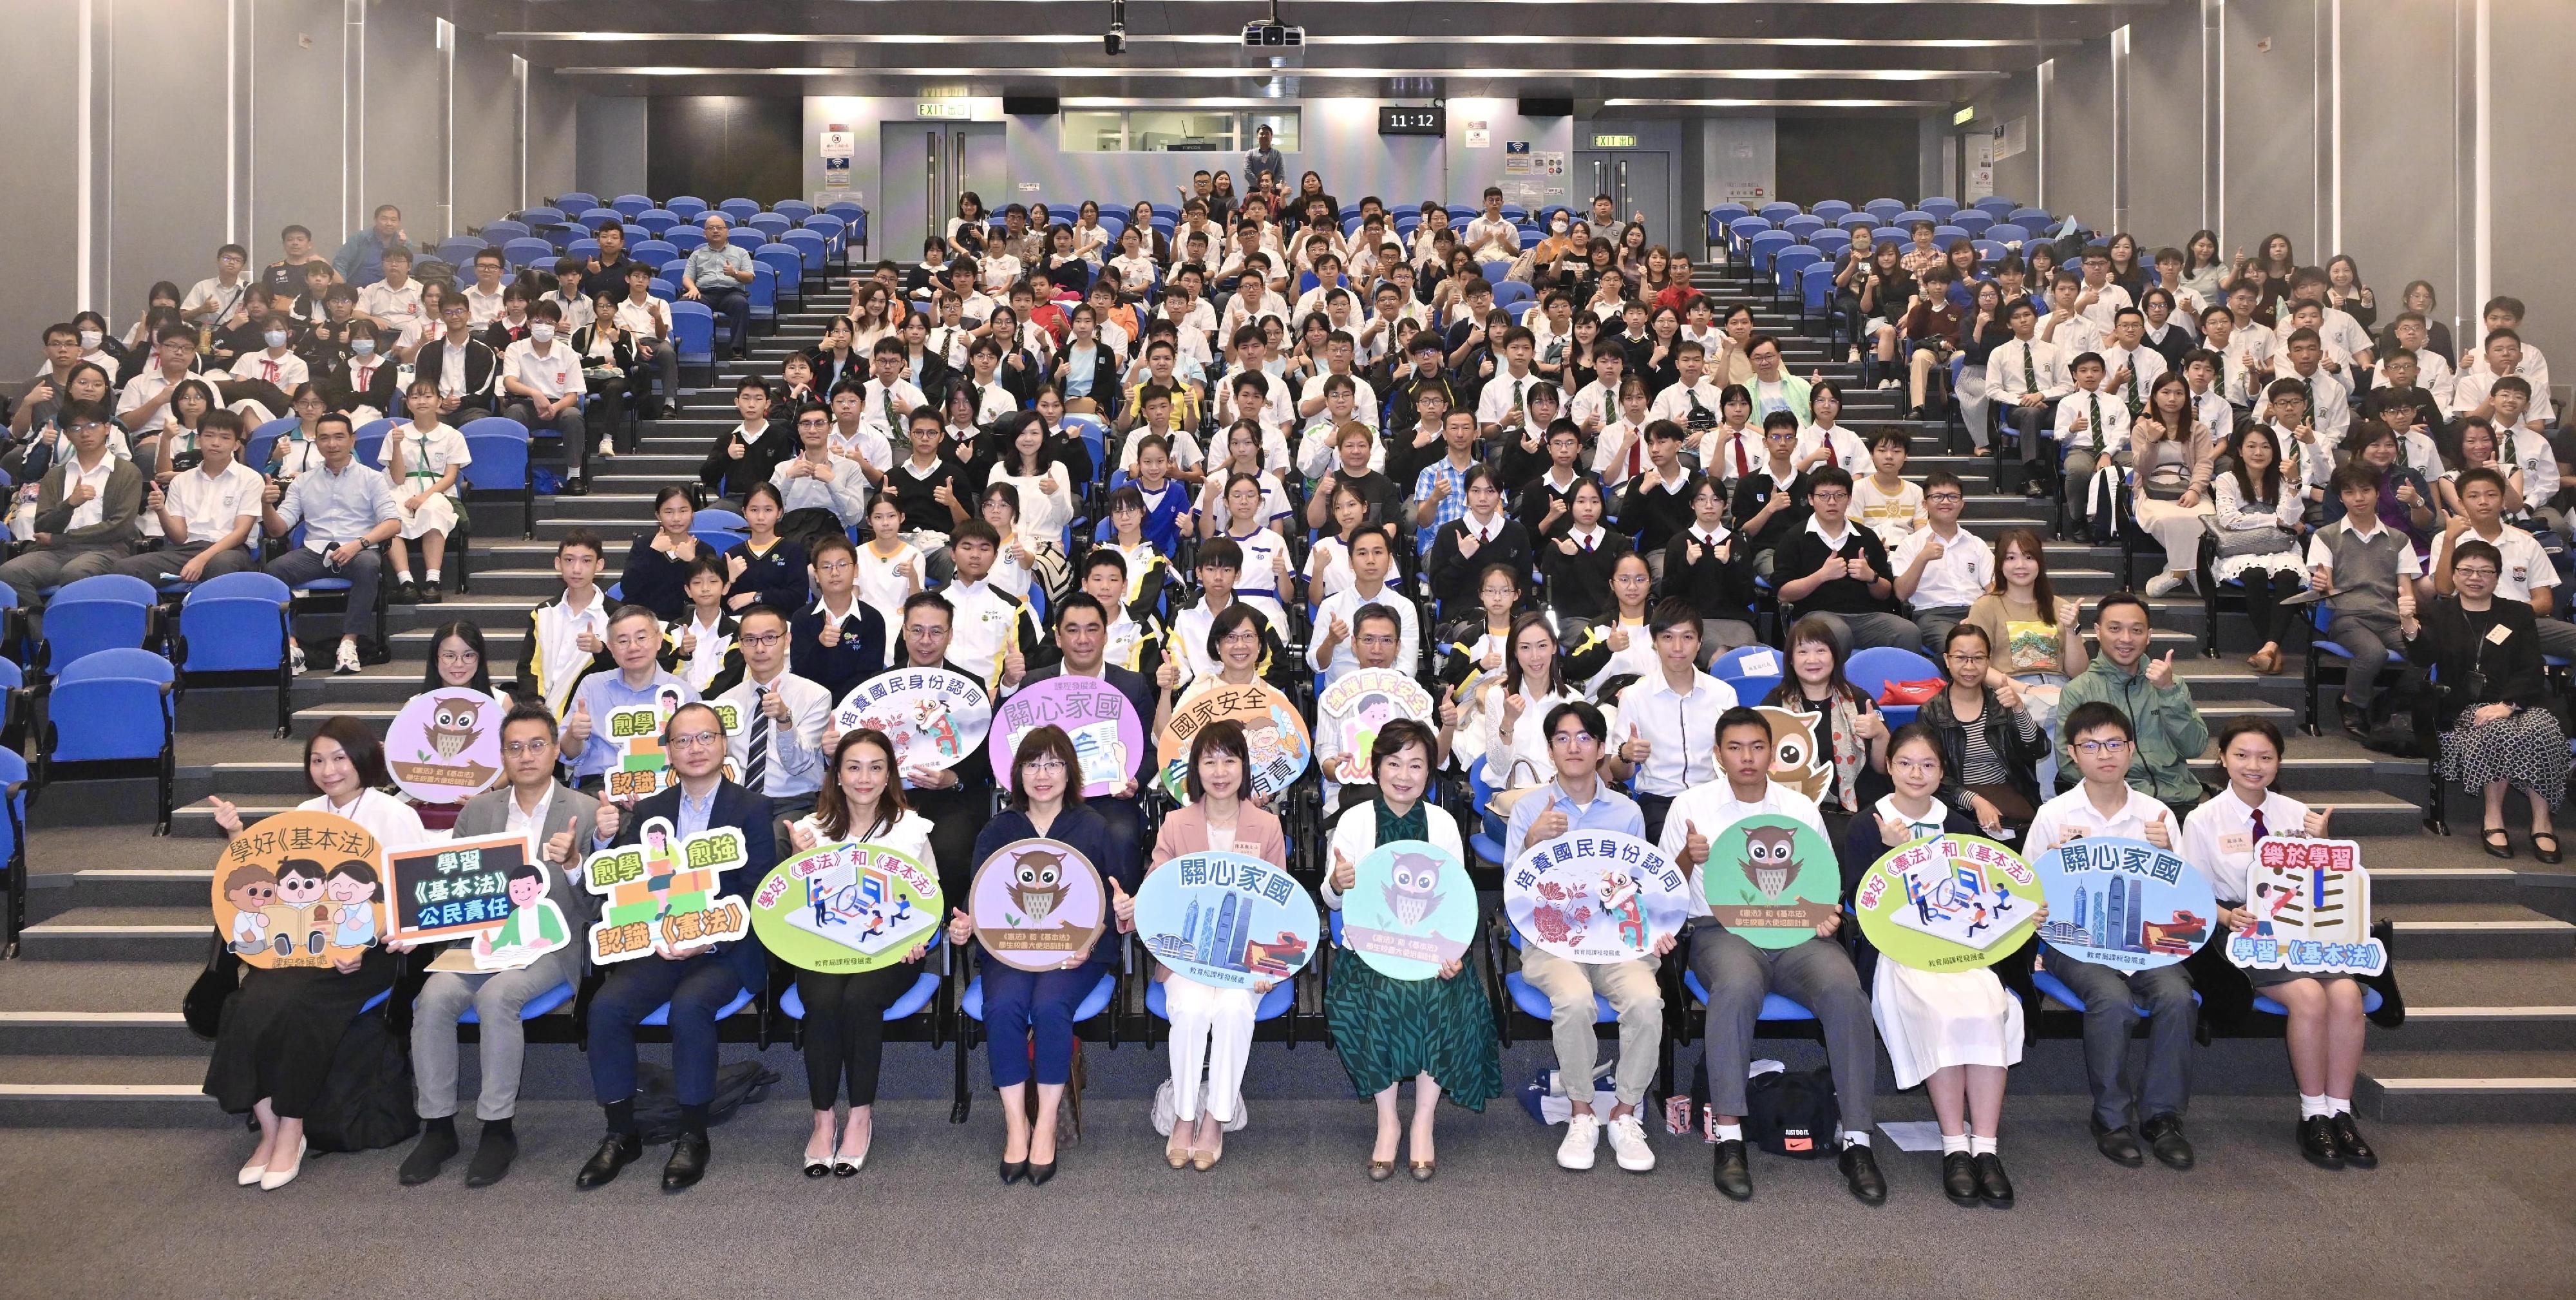 The Education Bureau today (October 28) held a sharing session on the "Important spirit of President Xi Jinping's reply letter to Hong Kong students". Photo shows the Secretary for Education, Dr Choi Yuk-lin (front row, sixth right), with students and teachers attending the sharing session.